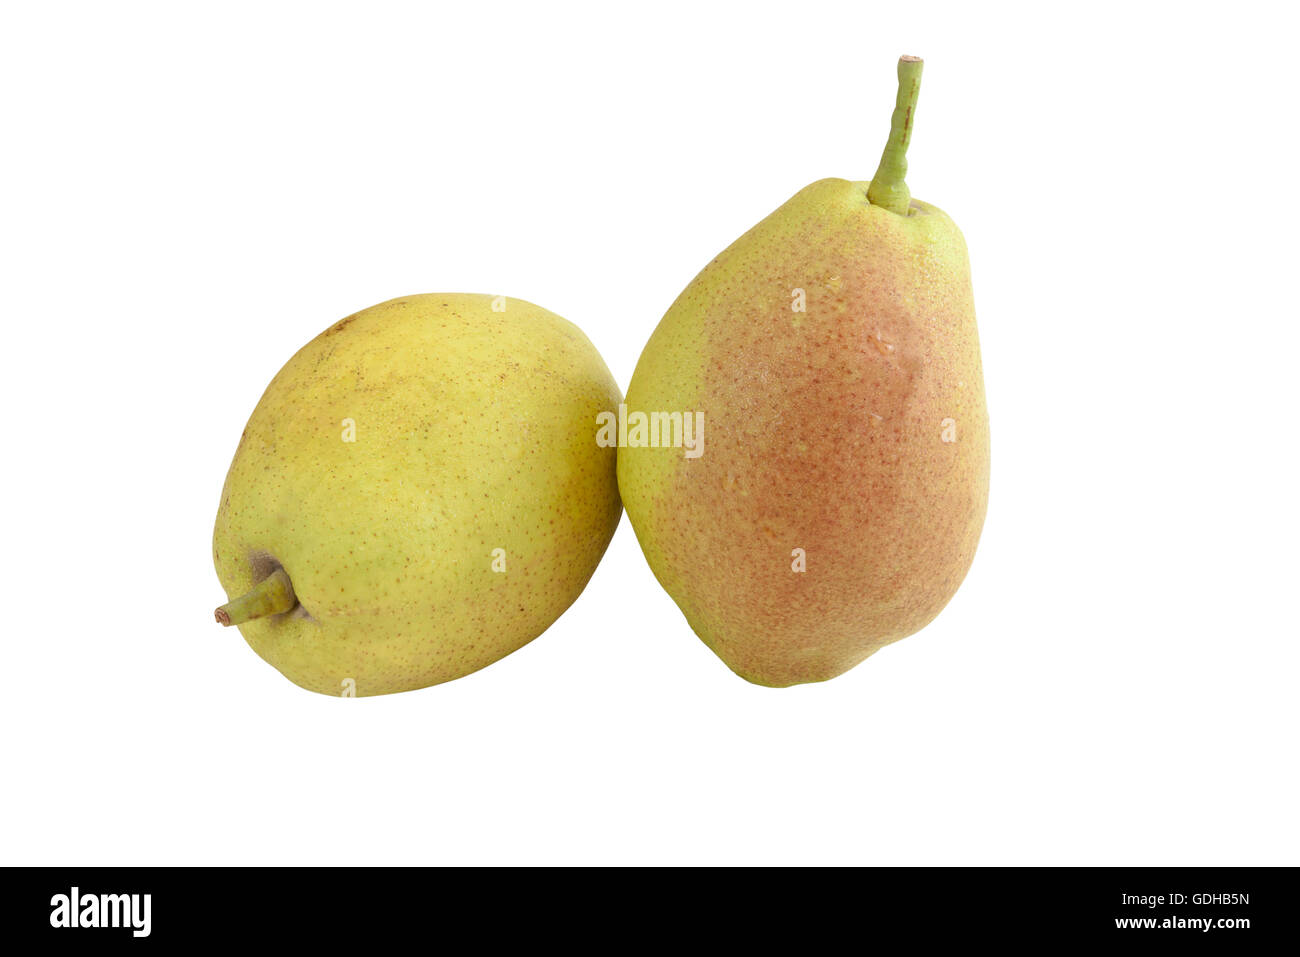 two Fragrant pears . sweet fragrant flavor and aroma on isolated white background and with work paths Stock Photo